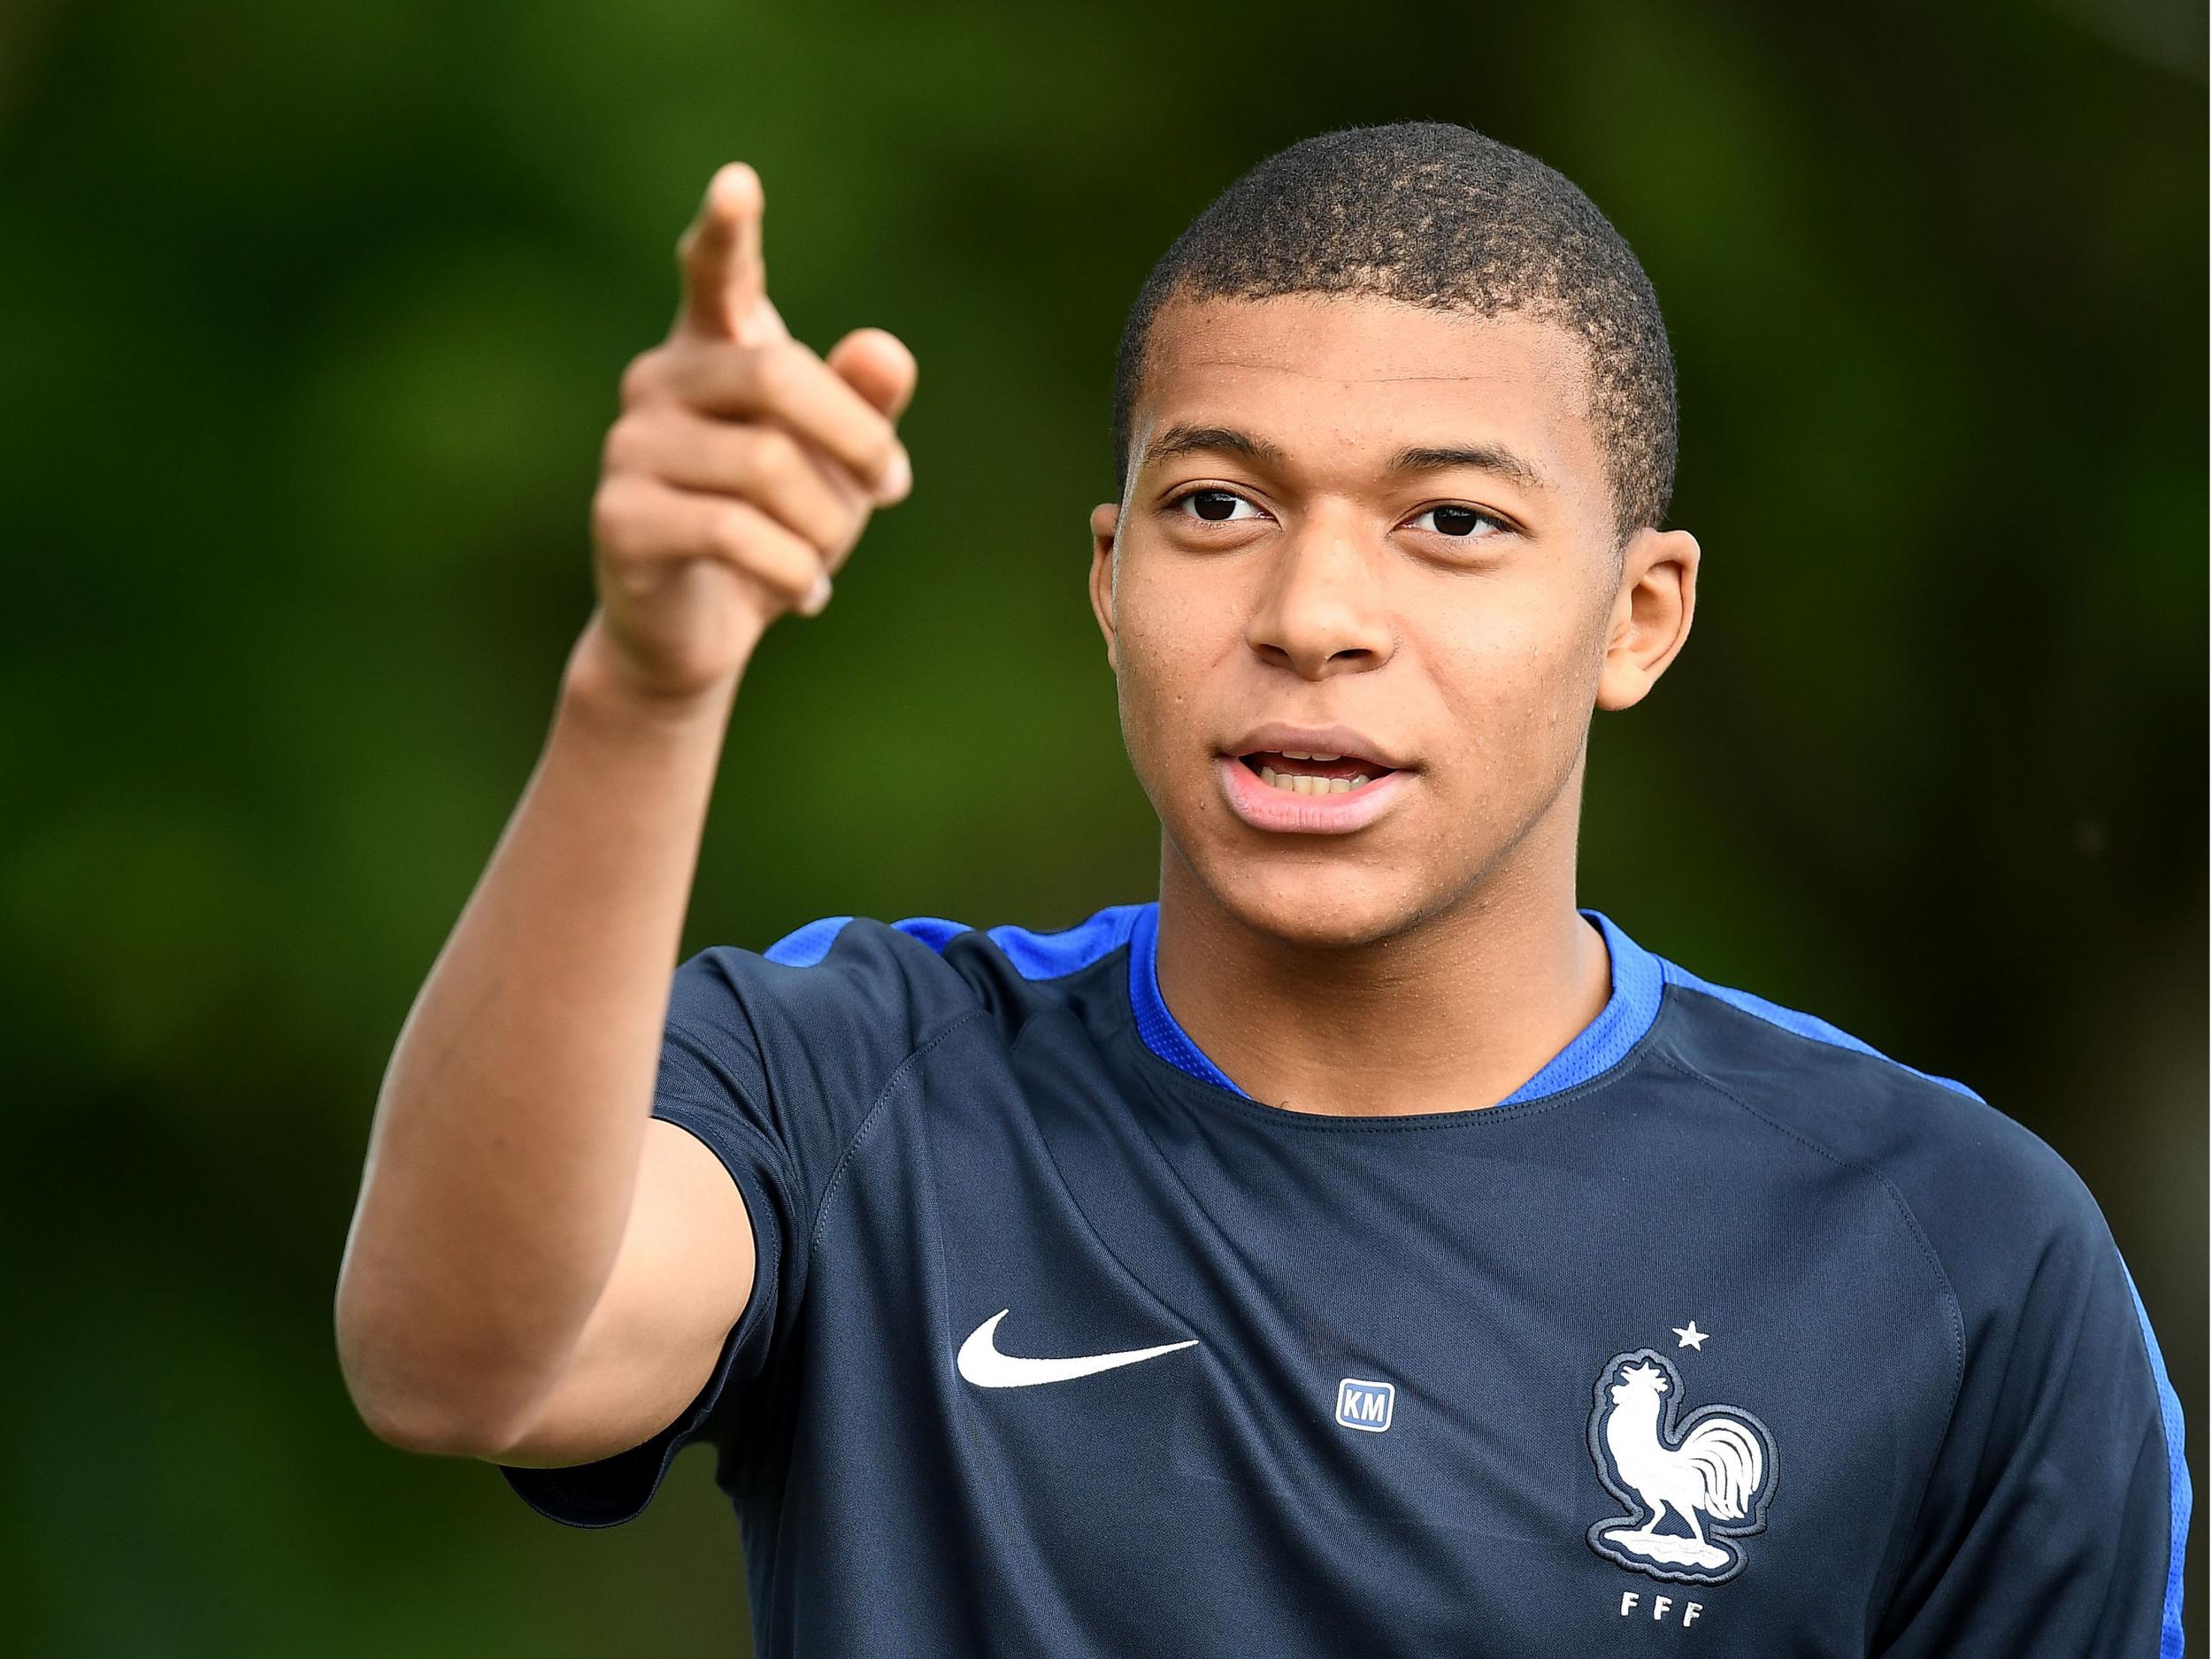 Mbappe, 18, made the revelation after France's 3-2 victory over England in Paris on Tuesday night